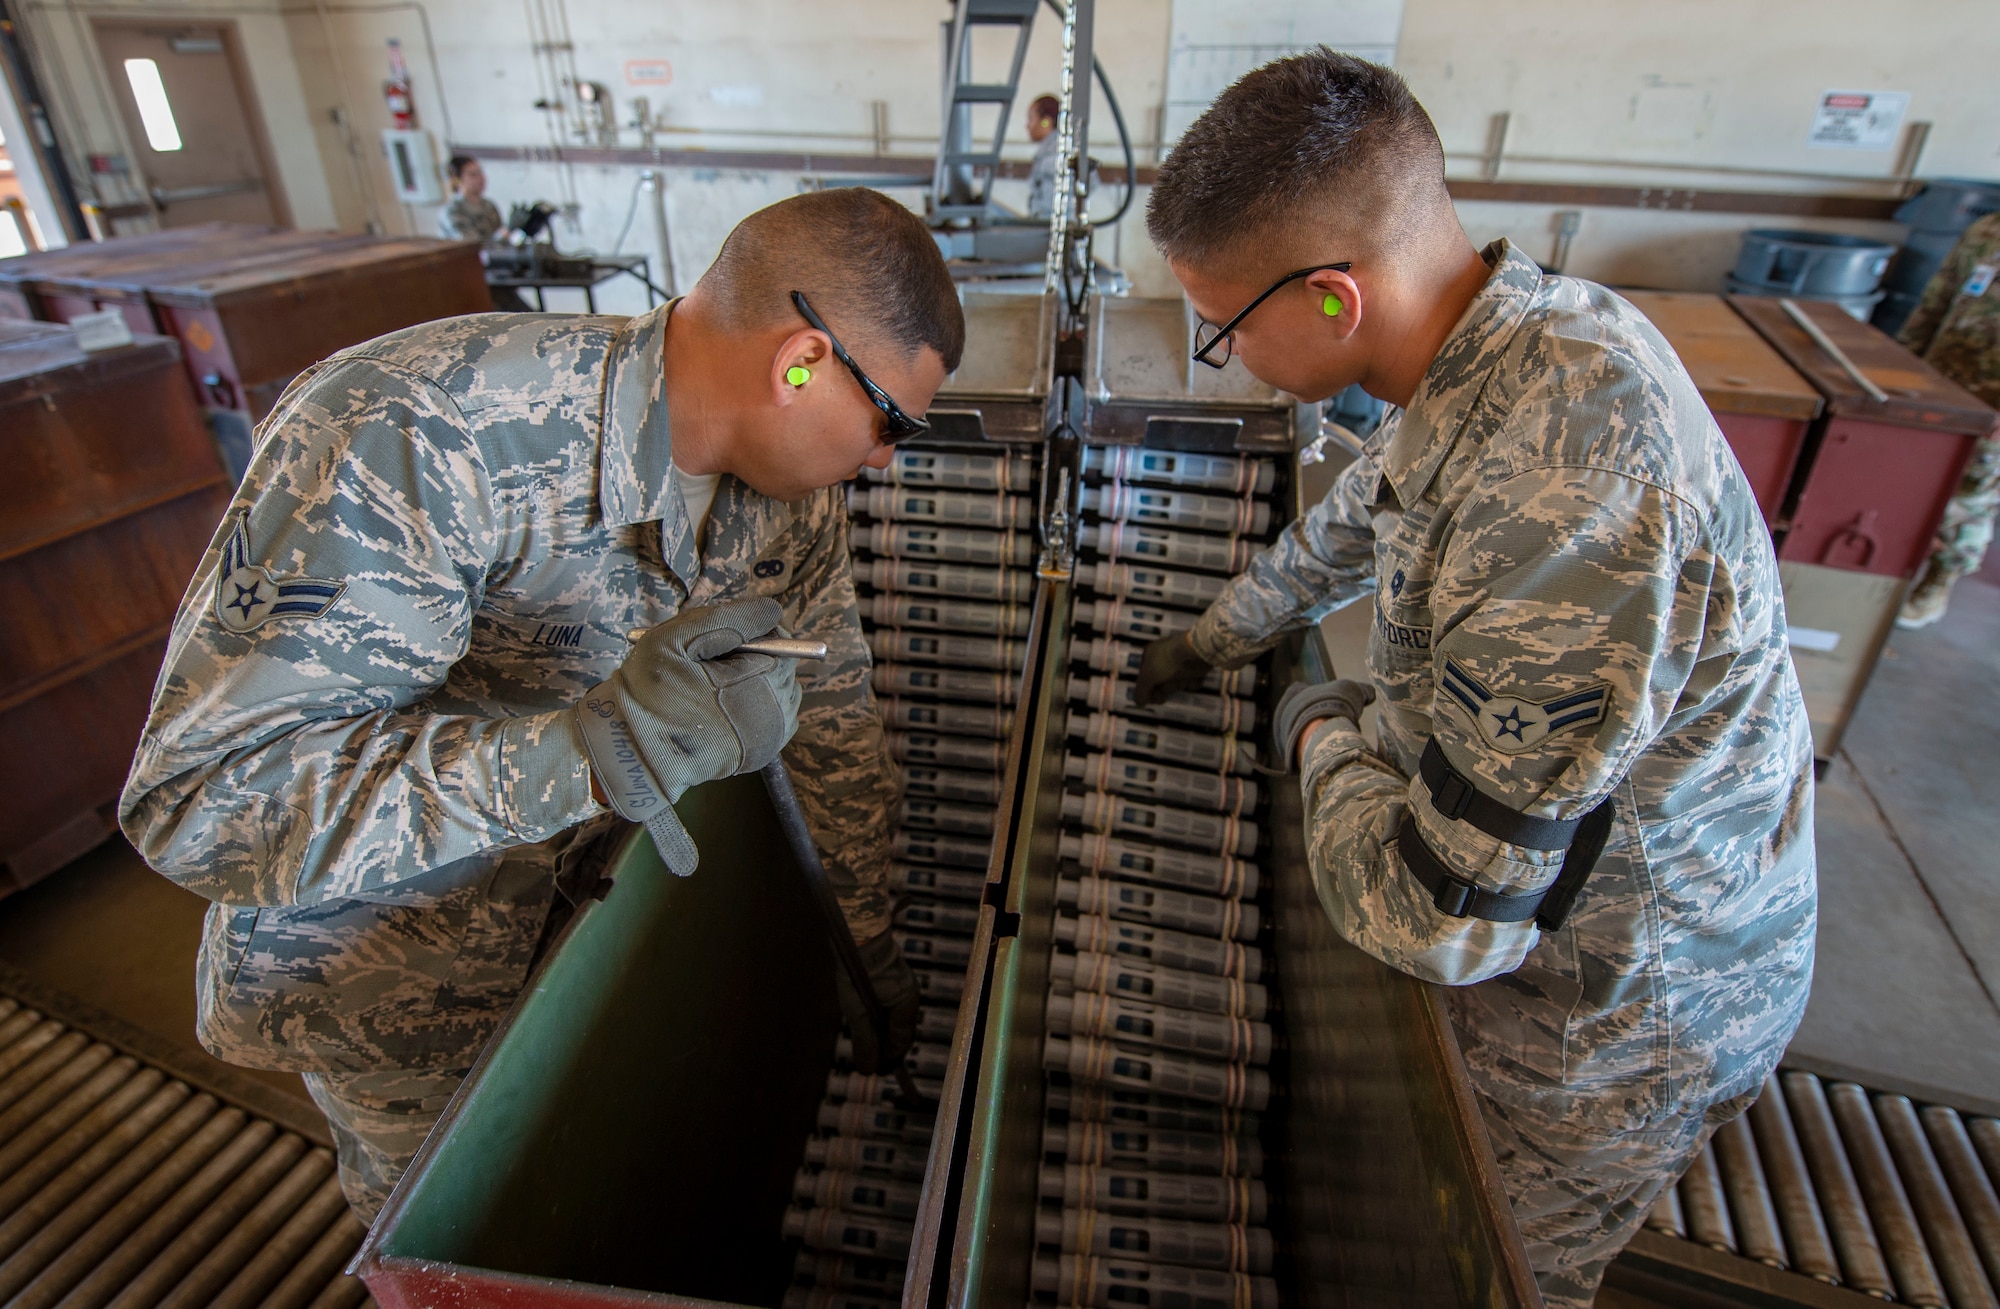 U.S. Air Force Airman 1st Class Stephen Luna, 57th Munitions Squadron (MUNS), small bombs crew member, and Airman 1st Class Christopher Conley, 57th MUNS small bombs crew chief, ensure the thread of 30mm round containers do not get jammed in the GFU-7 while being processed at Nellis Air Force Base, Nev., June 4, 2019. The machine processes the 30mm rounds by counting all serviceable and non-serviceable rounds as well as separating the brass from the ammunition downloaded from A-10 Thunderbolts and returns good rounds into another container. (U.S. Air Force photo by Staff Sgt. Tabatha McCarthy)